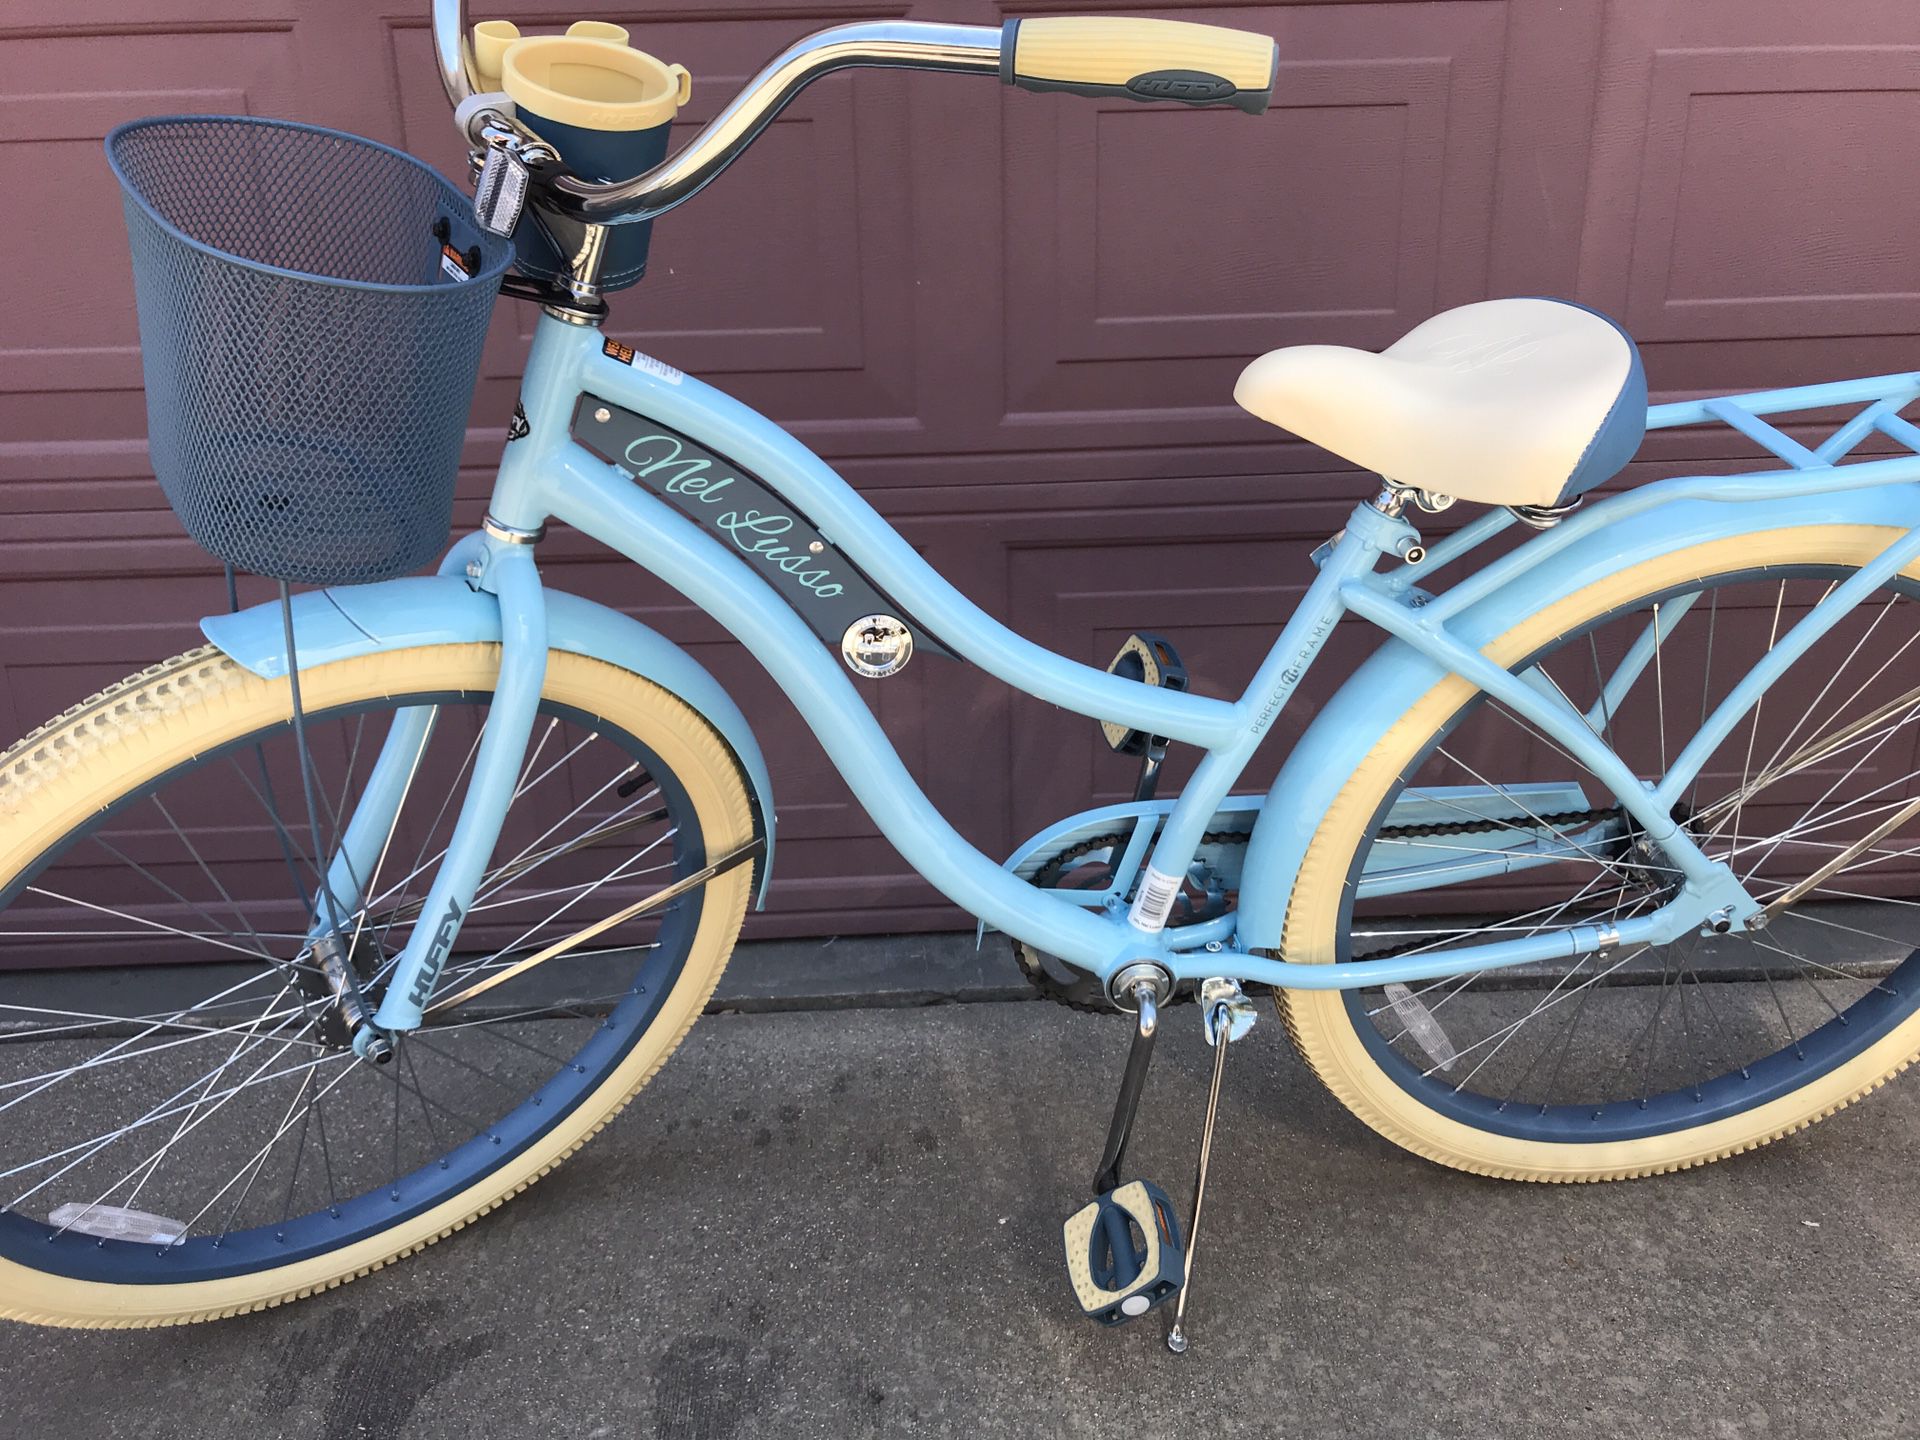 26” Women’s Cruiser Bike with basket, cup/cell holder, rear rack - Brand New